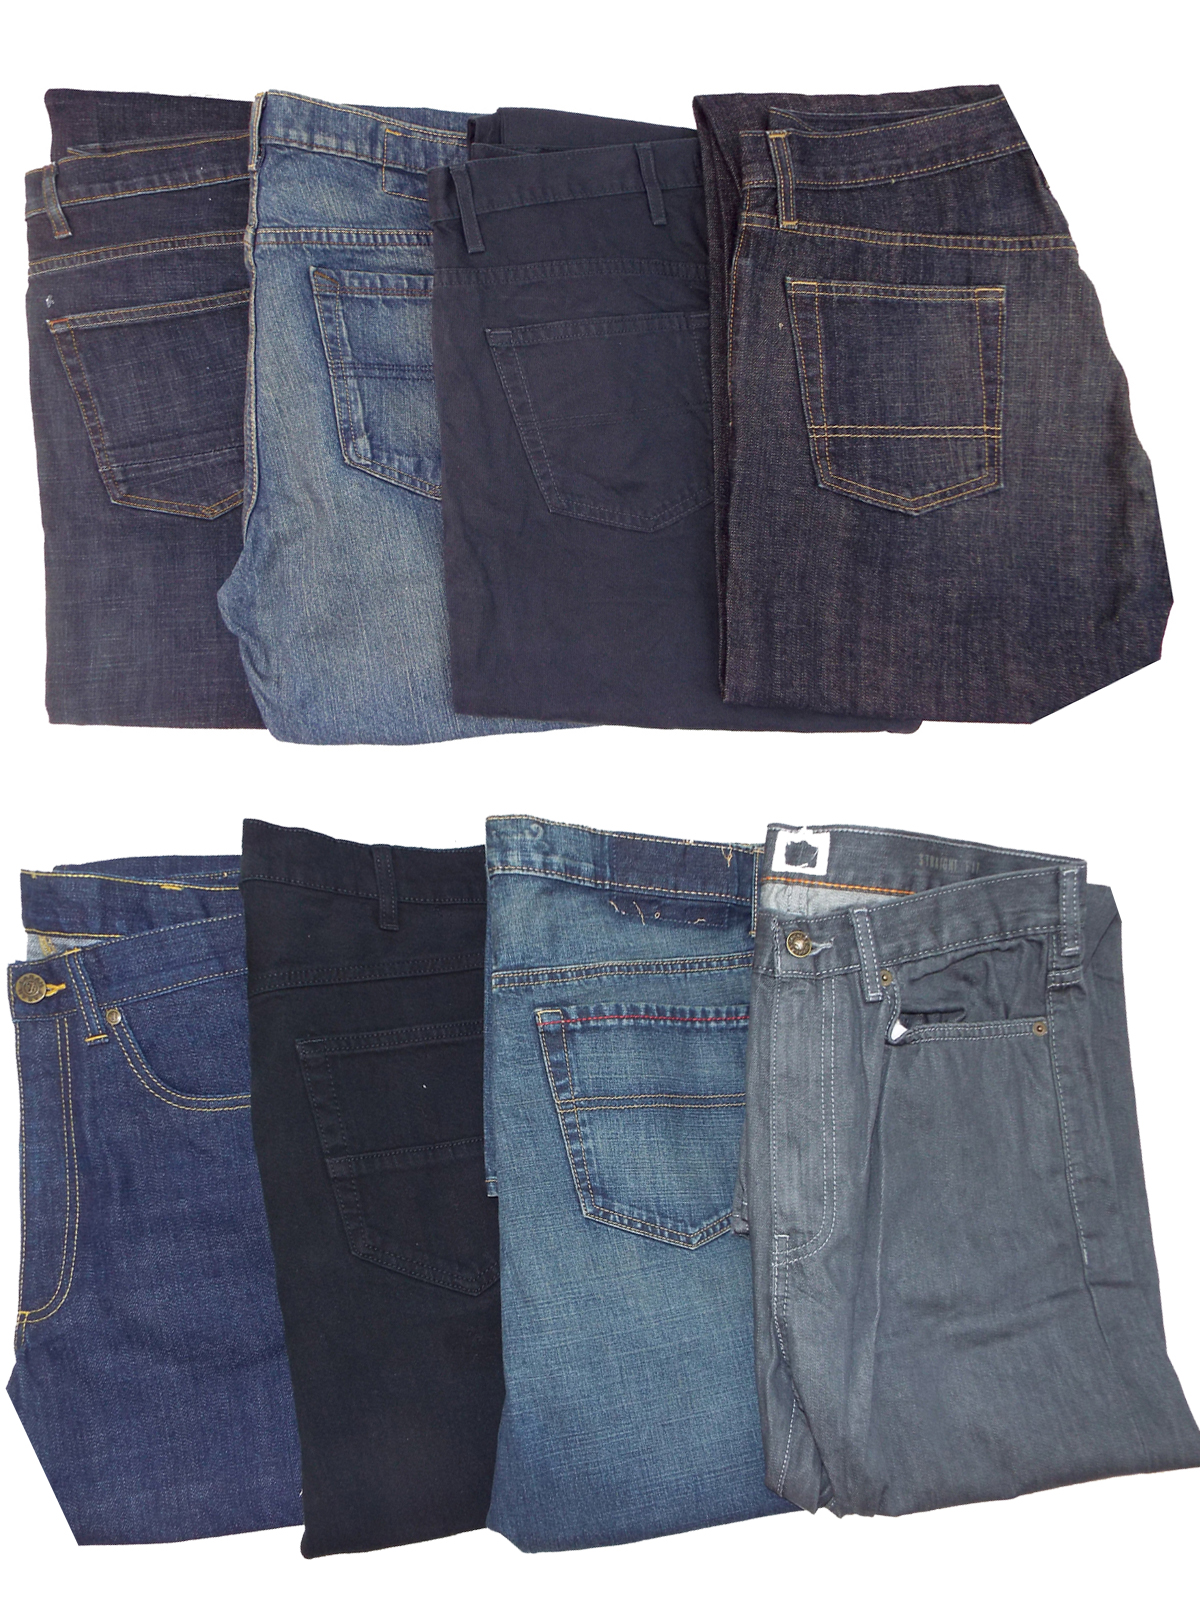 ASSORTED Pure Cotton Straight Fit Denim Jeans - Waist Size 32 to 38